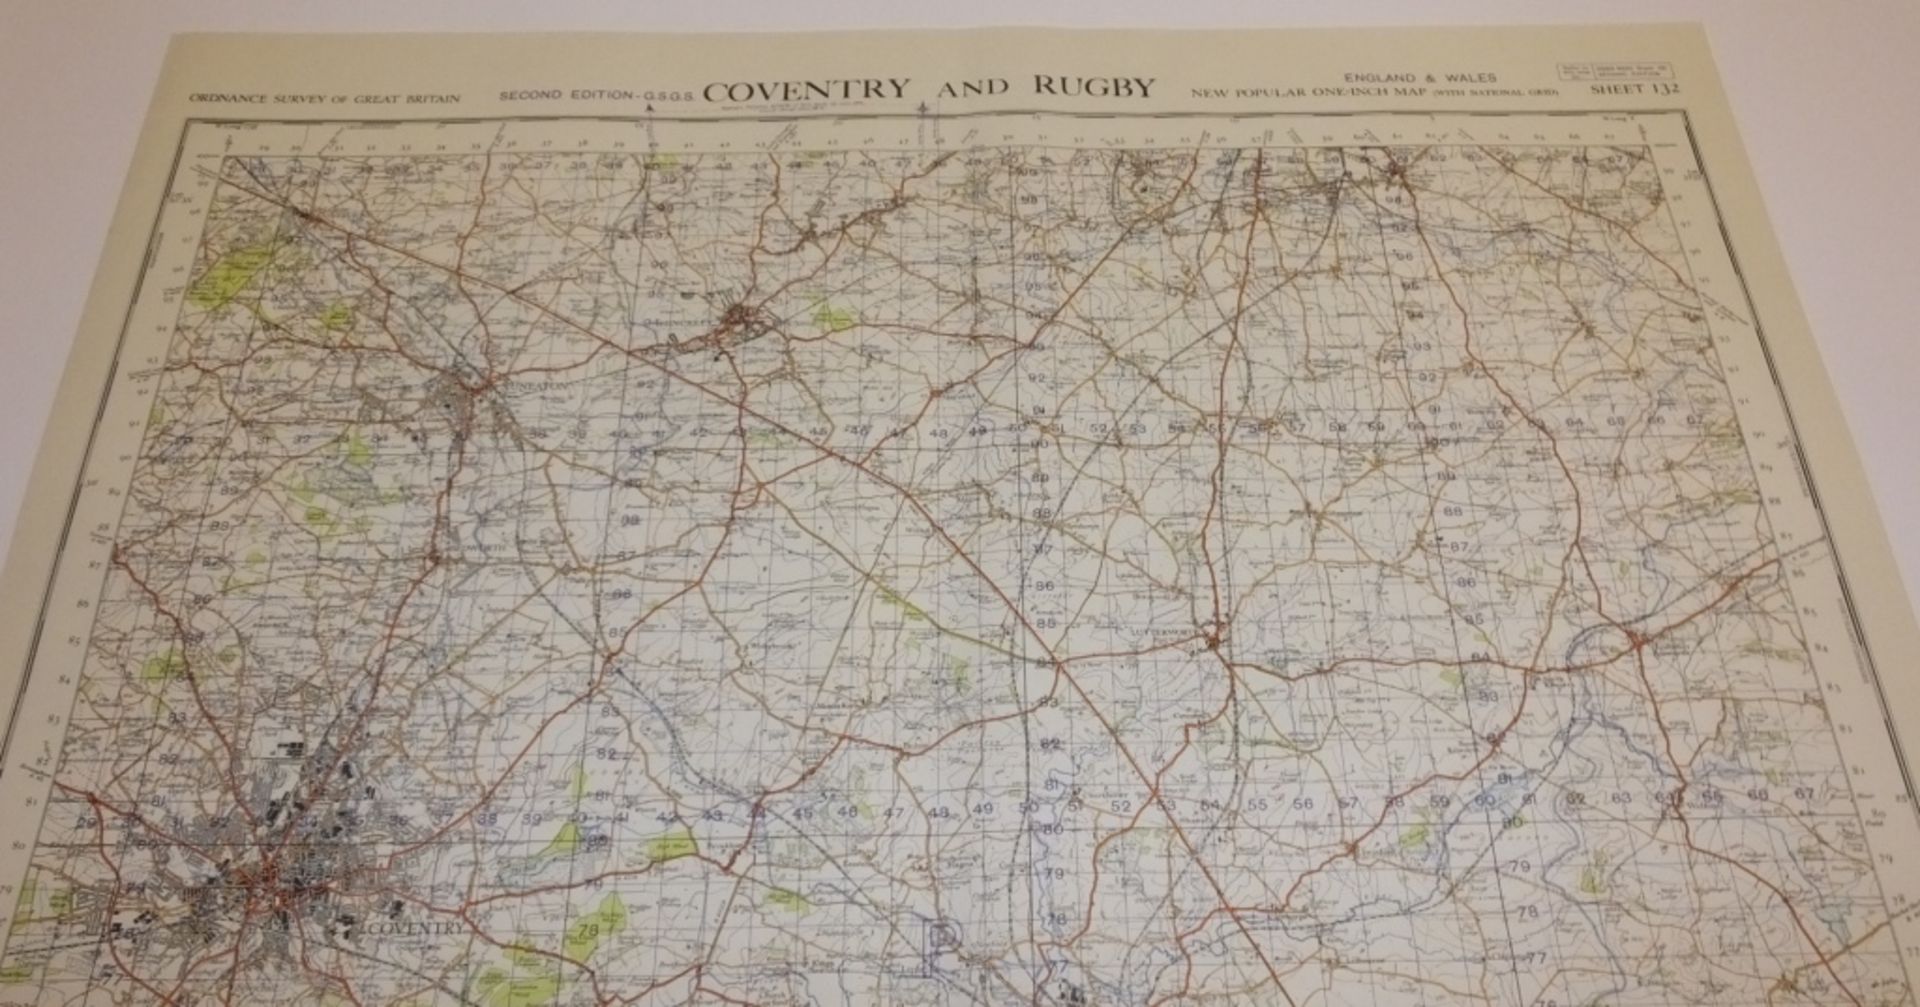 18x ENGLAND & WALES MAP COVENTRY RUENGLAND & WALESY 1INCH 1MILE 1952 2ND EDITION 4620GSGS - Bild 3 aus 5